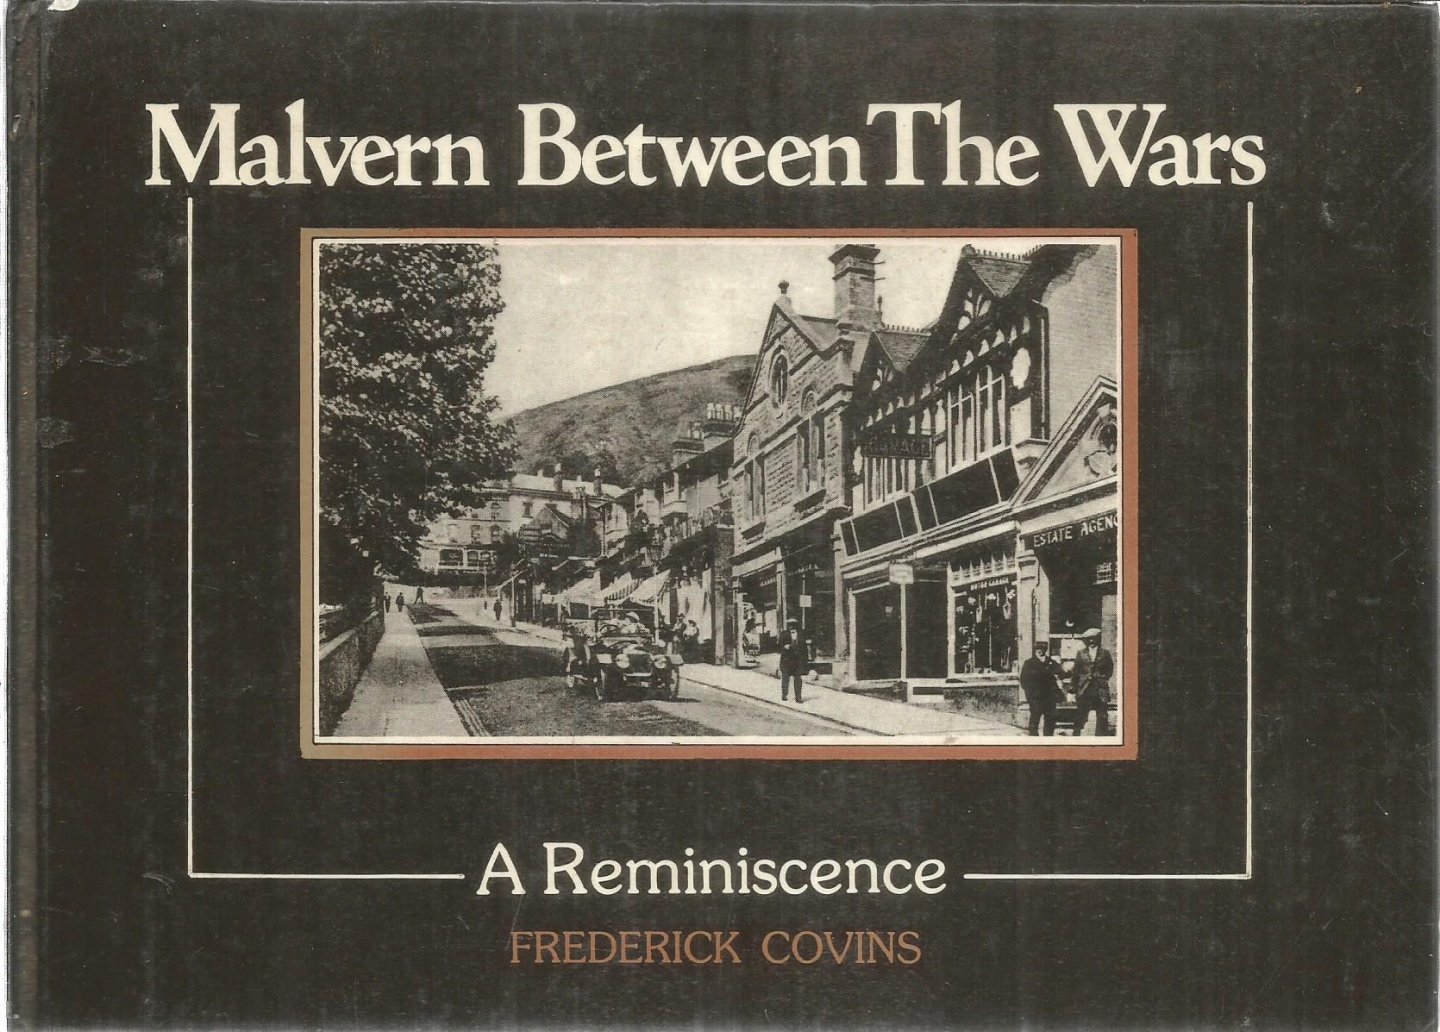 Covins, Frederick - Malvern between the wars - a reminiscence